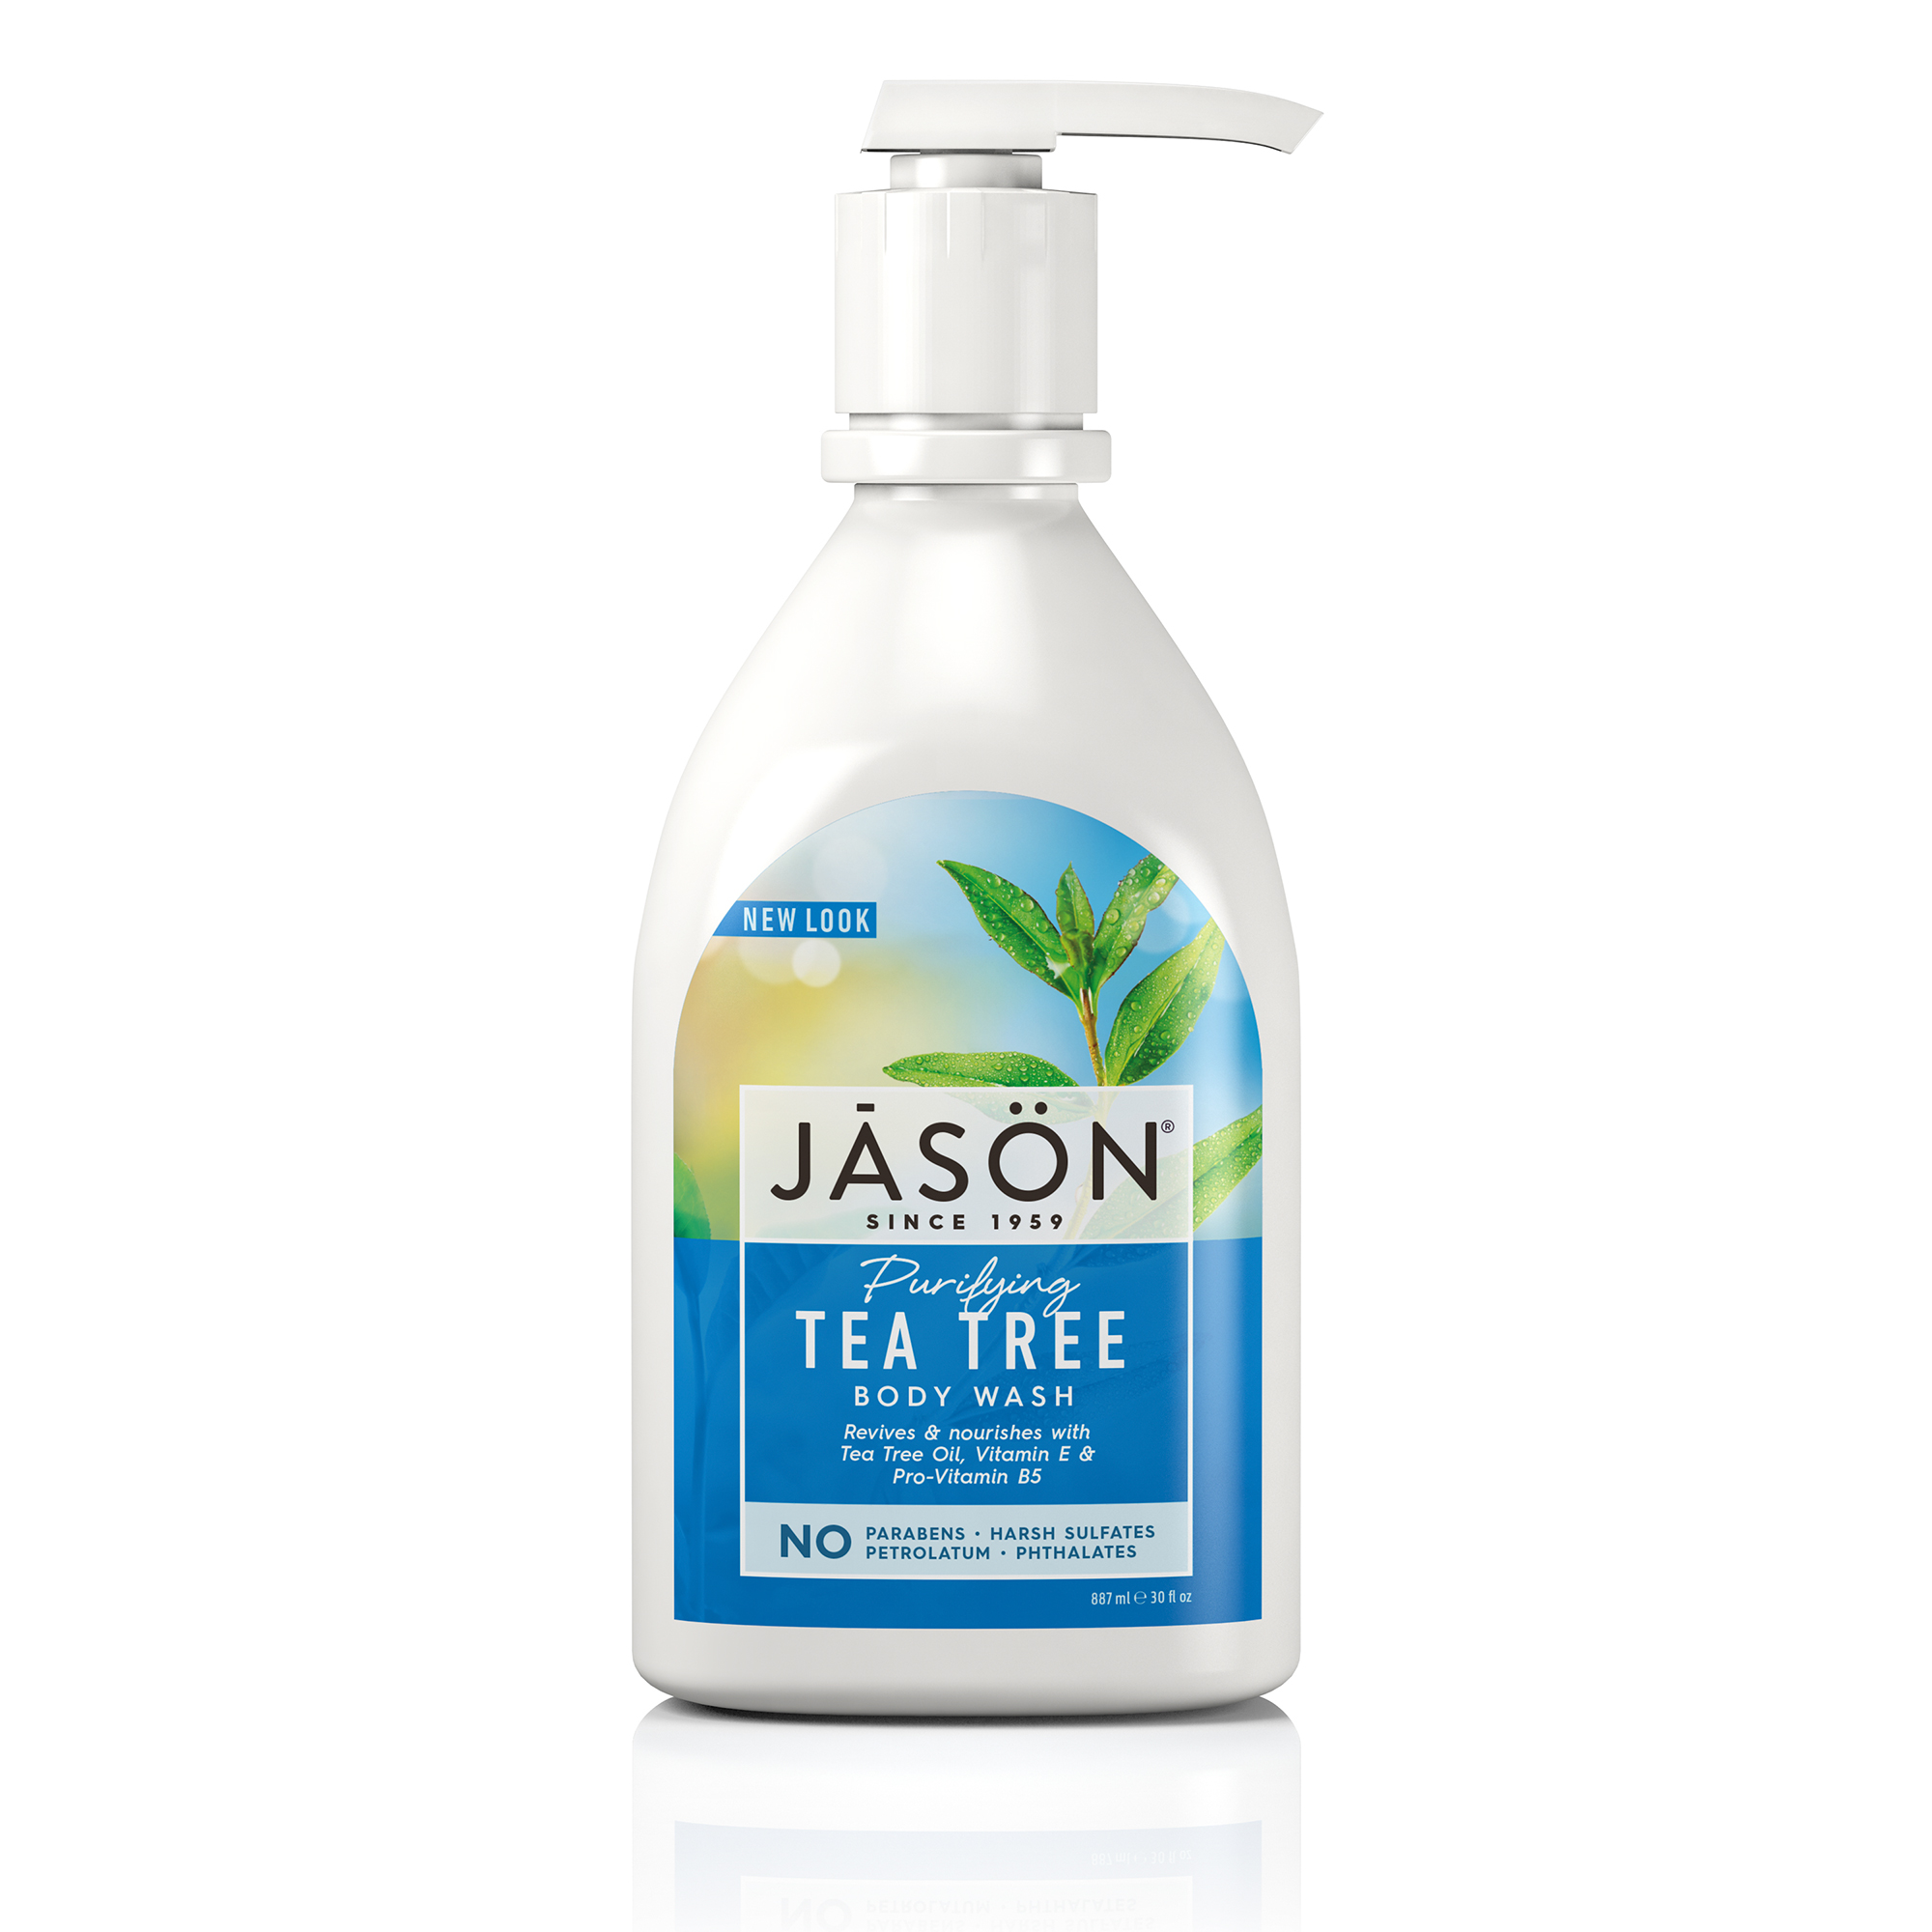 Jason Natural Products Tea Tree Satin Shower Body Wash, 30 Ounce - 3 per case.